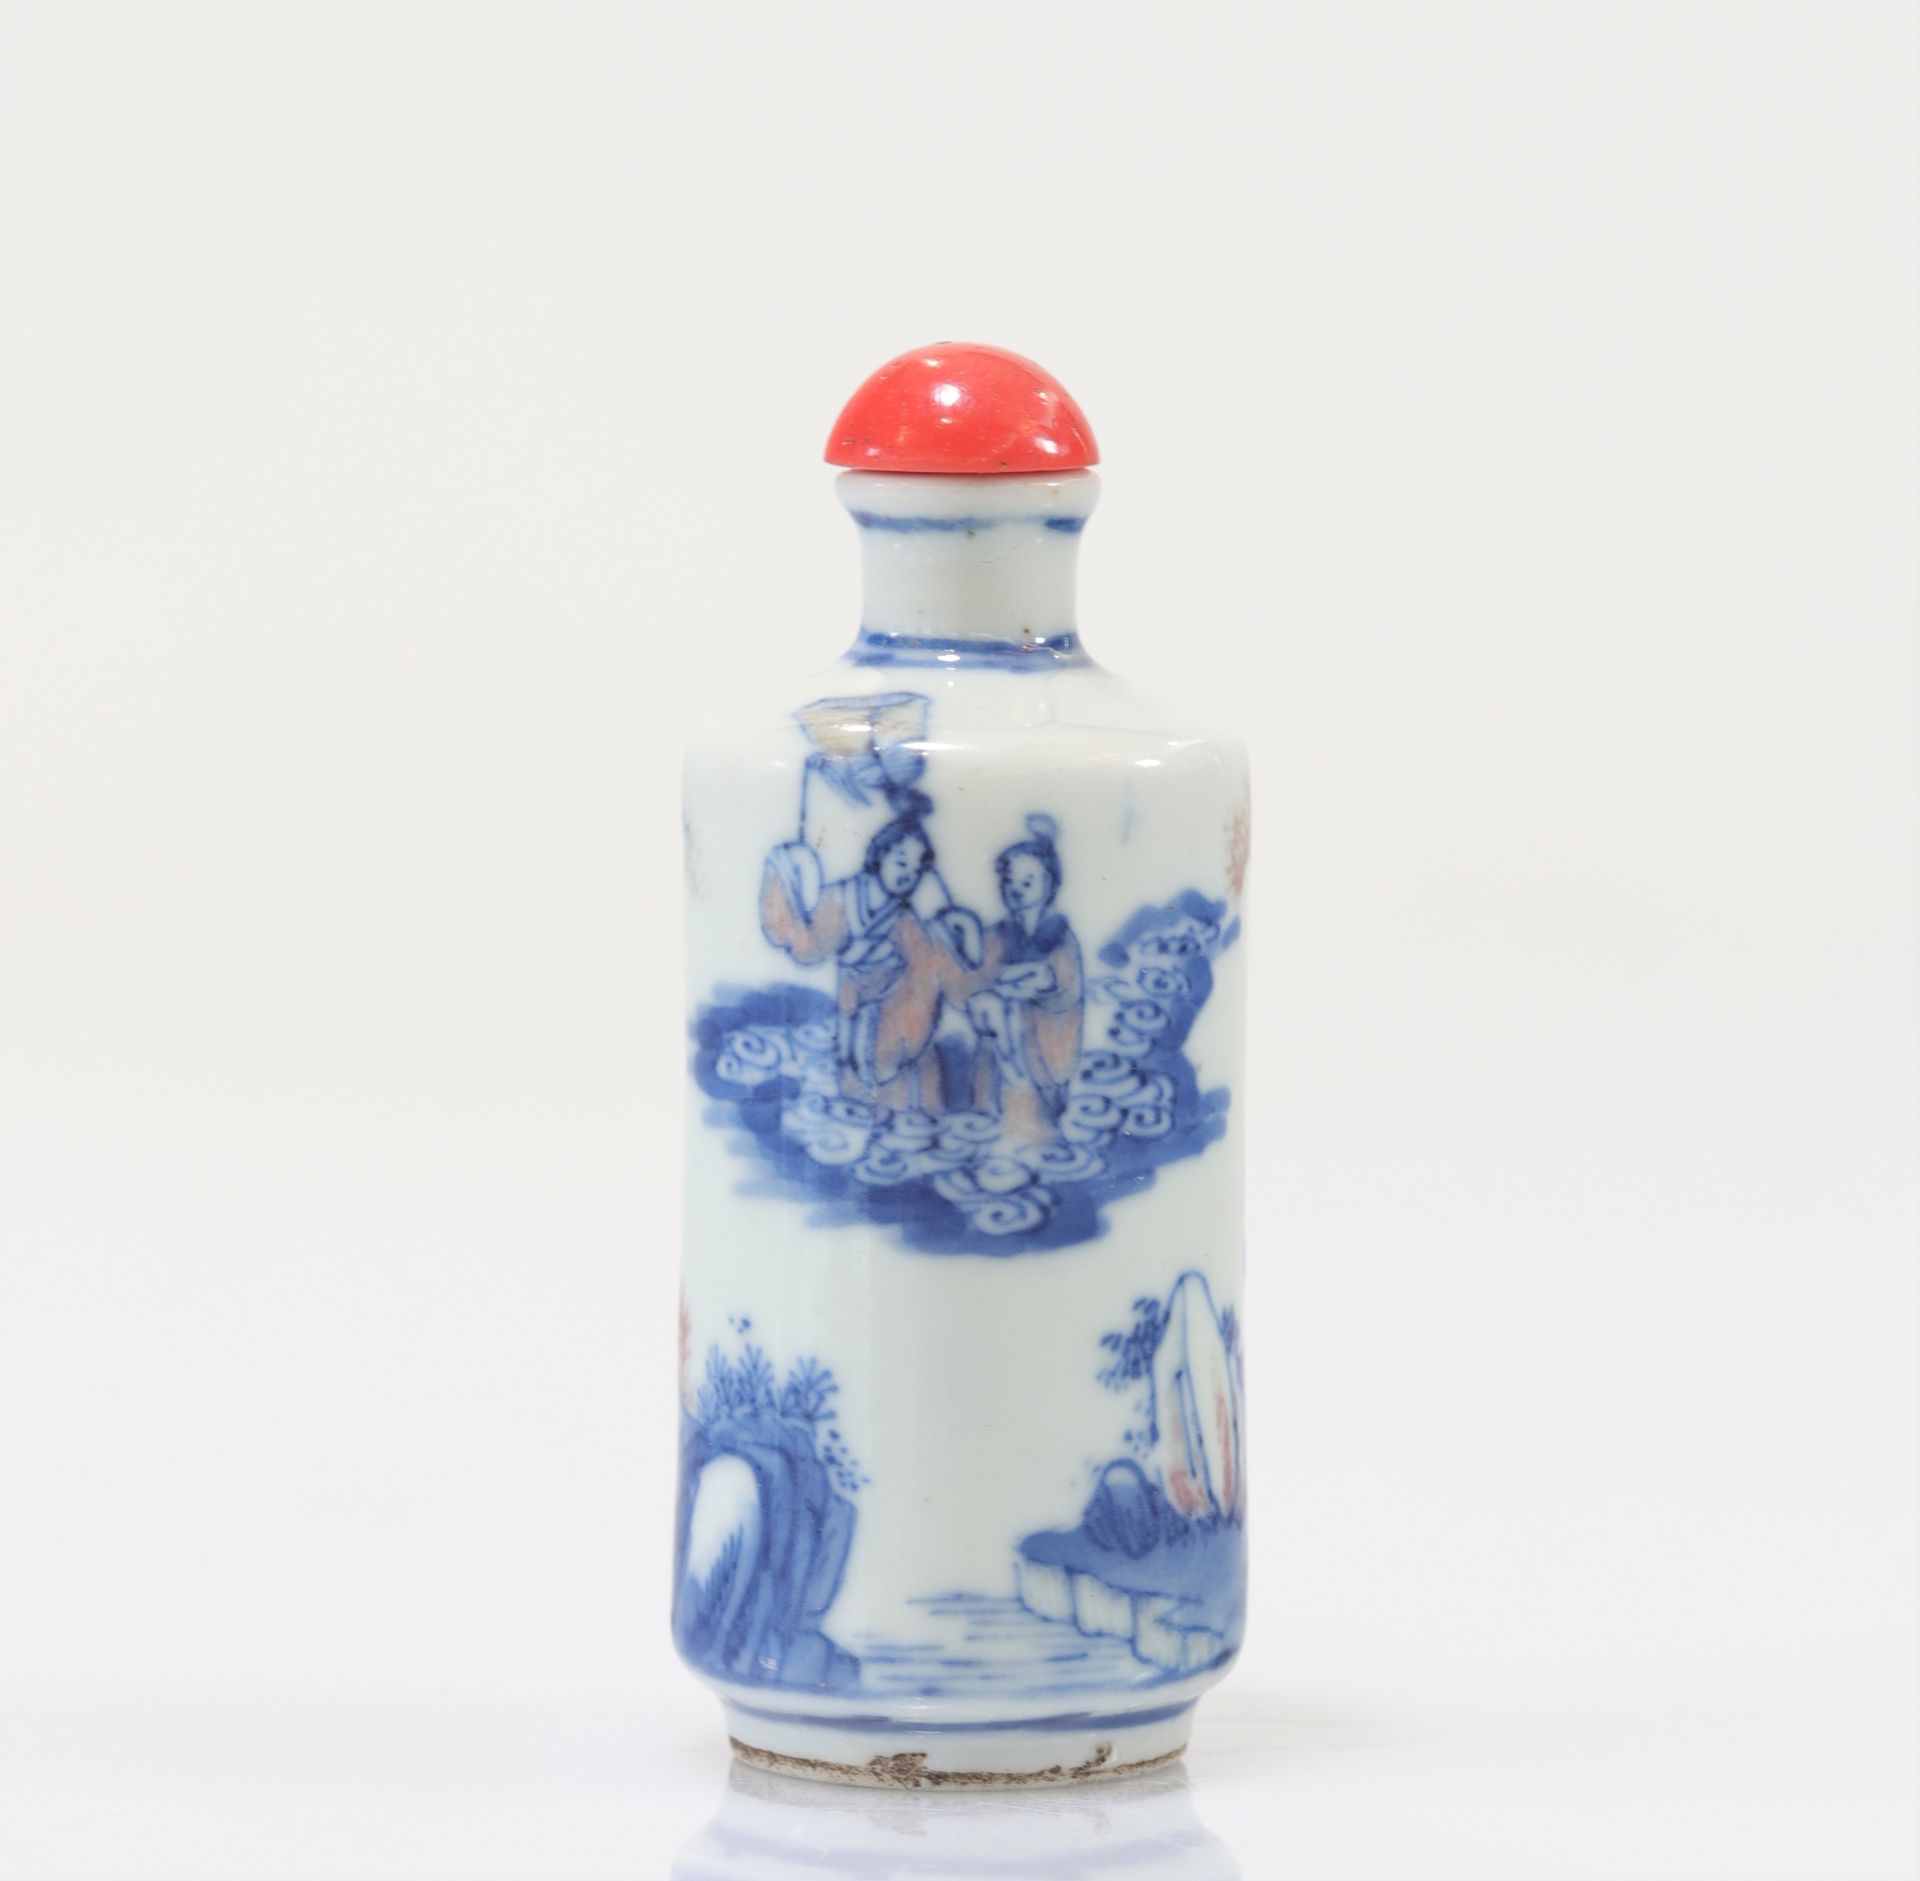 White blue and iron red porcelain snuff bottle decorated with Qing period characters - Image 3 of 8